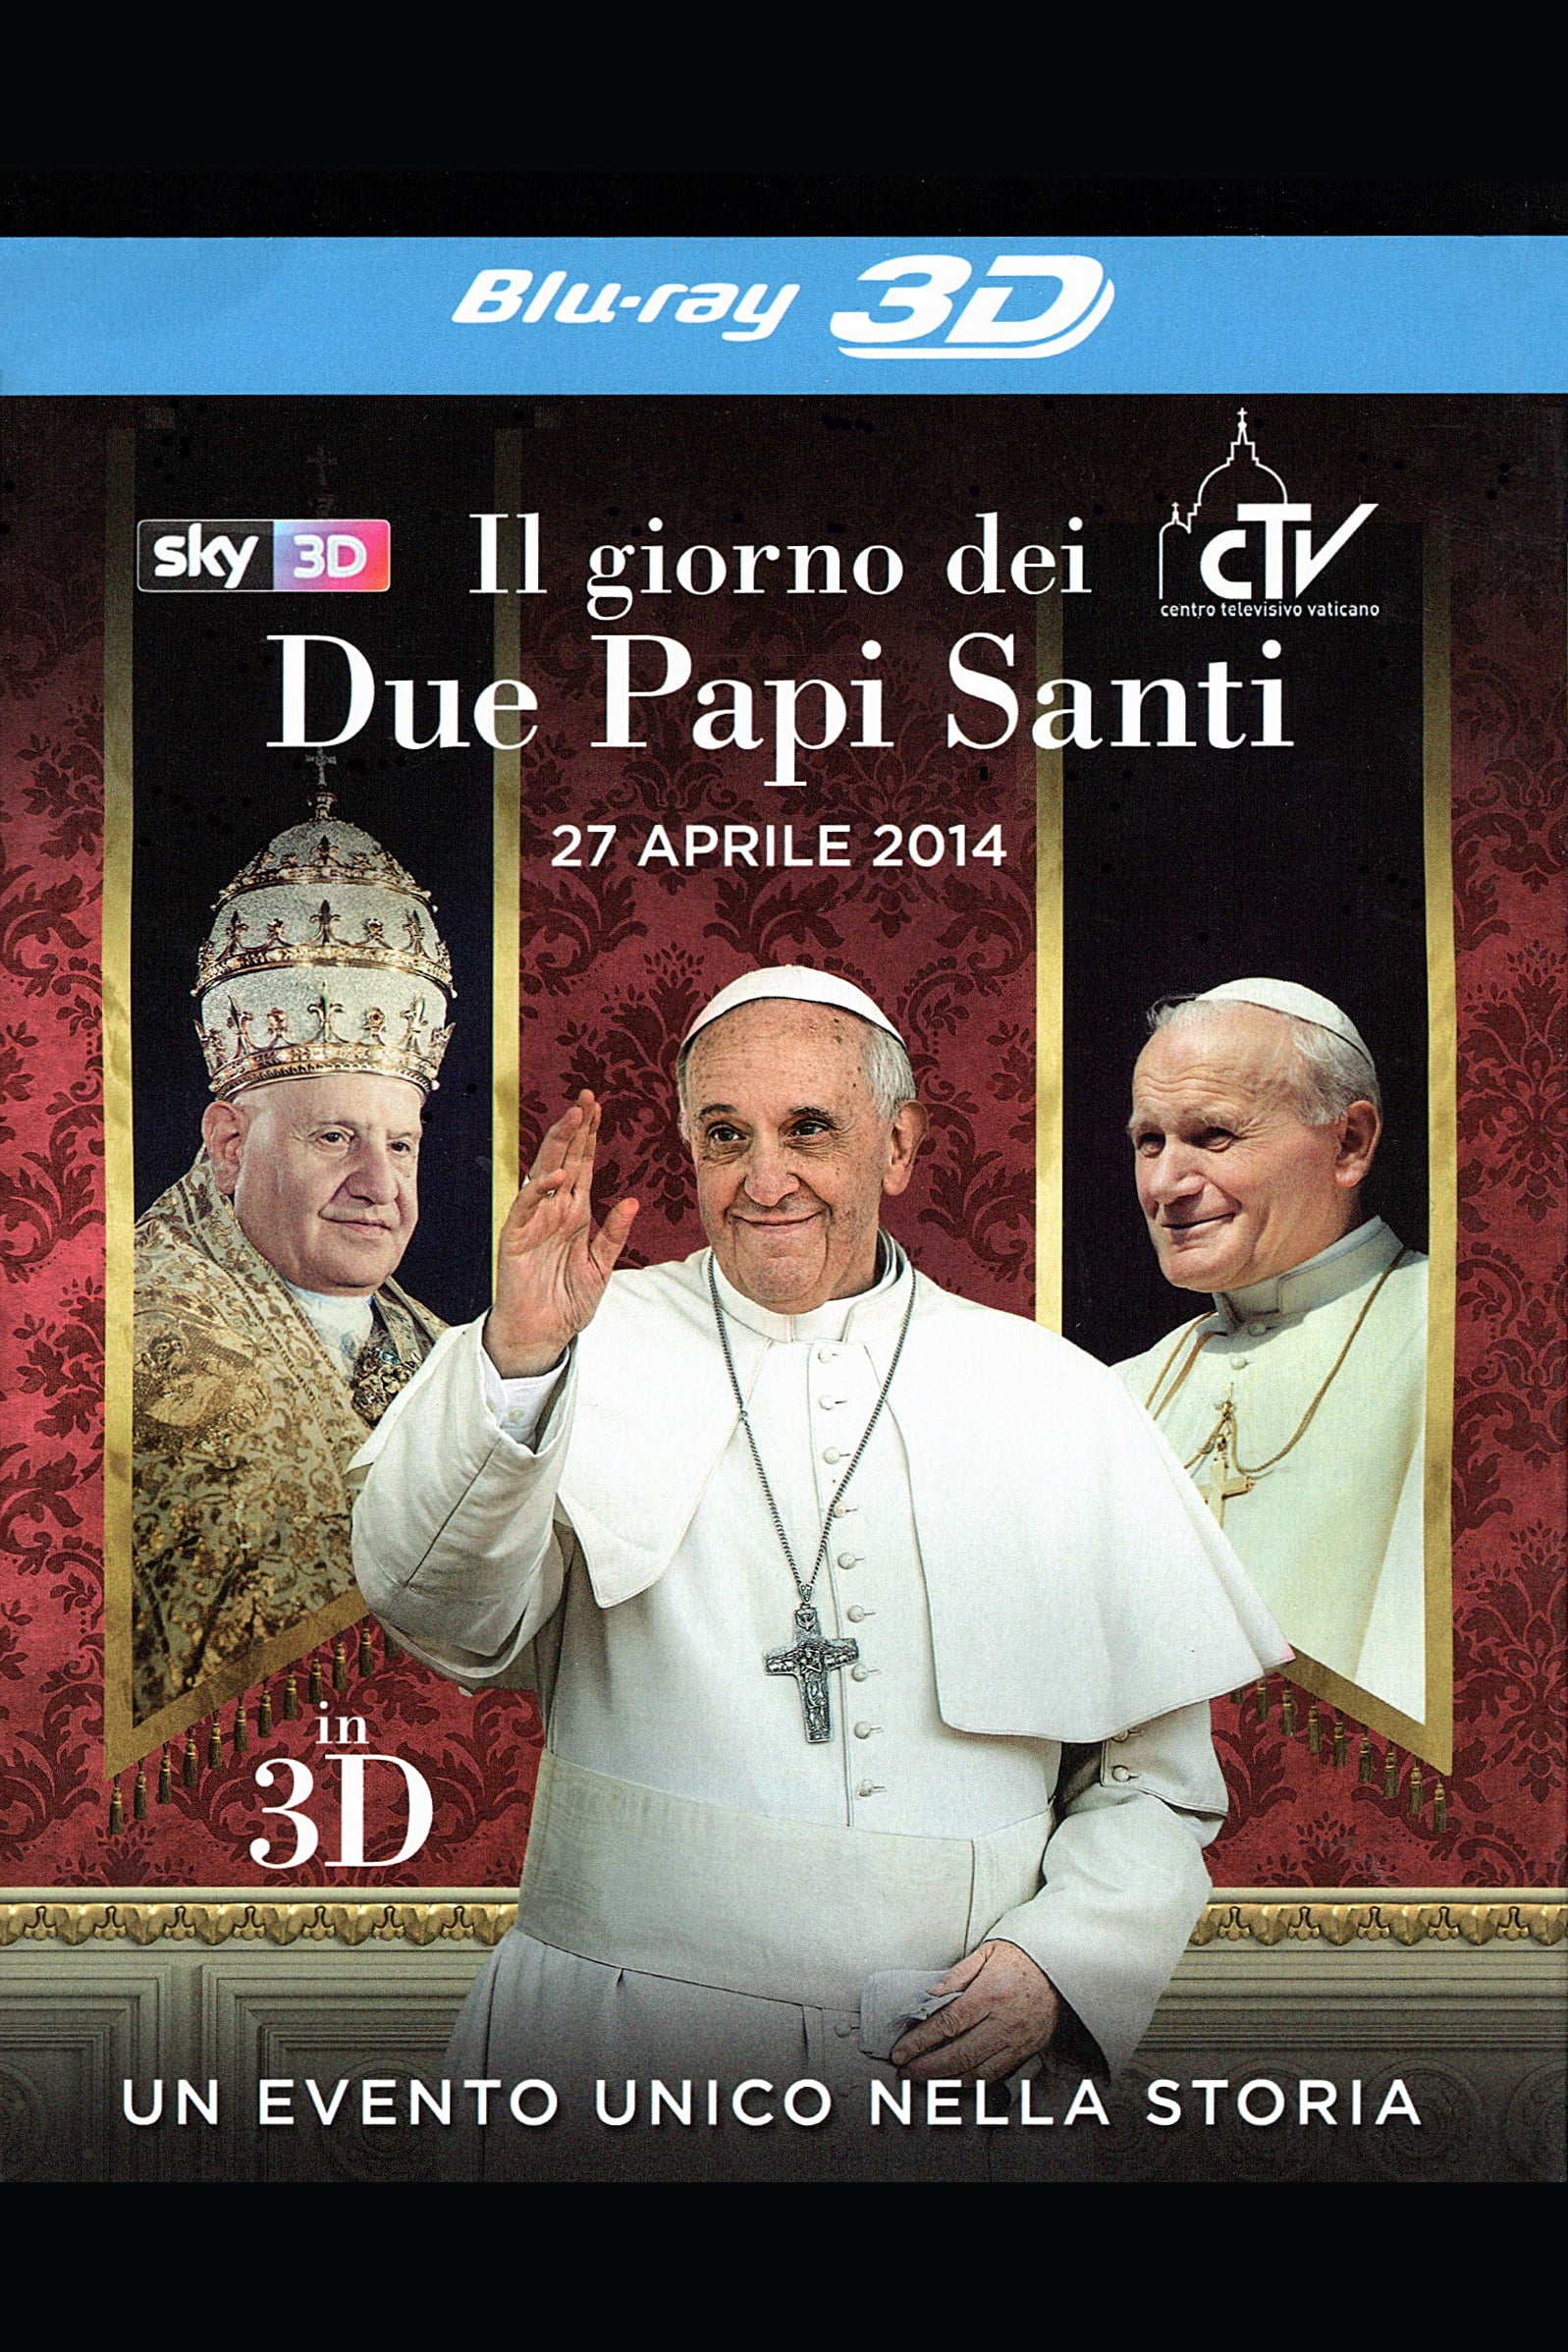 The Day of the Two Holy Popes